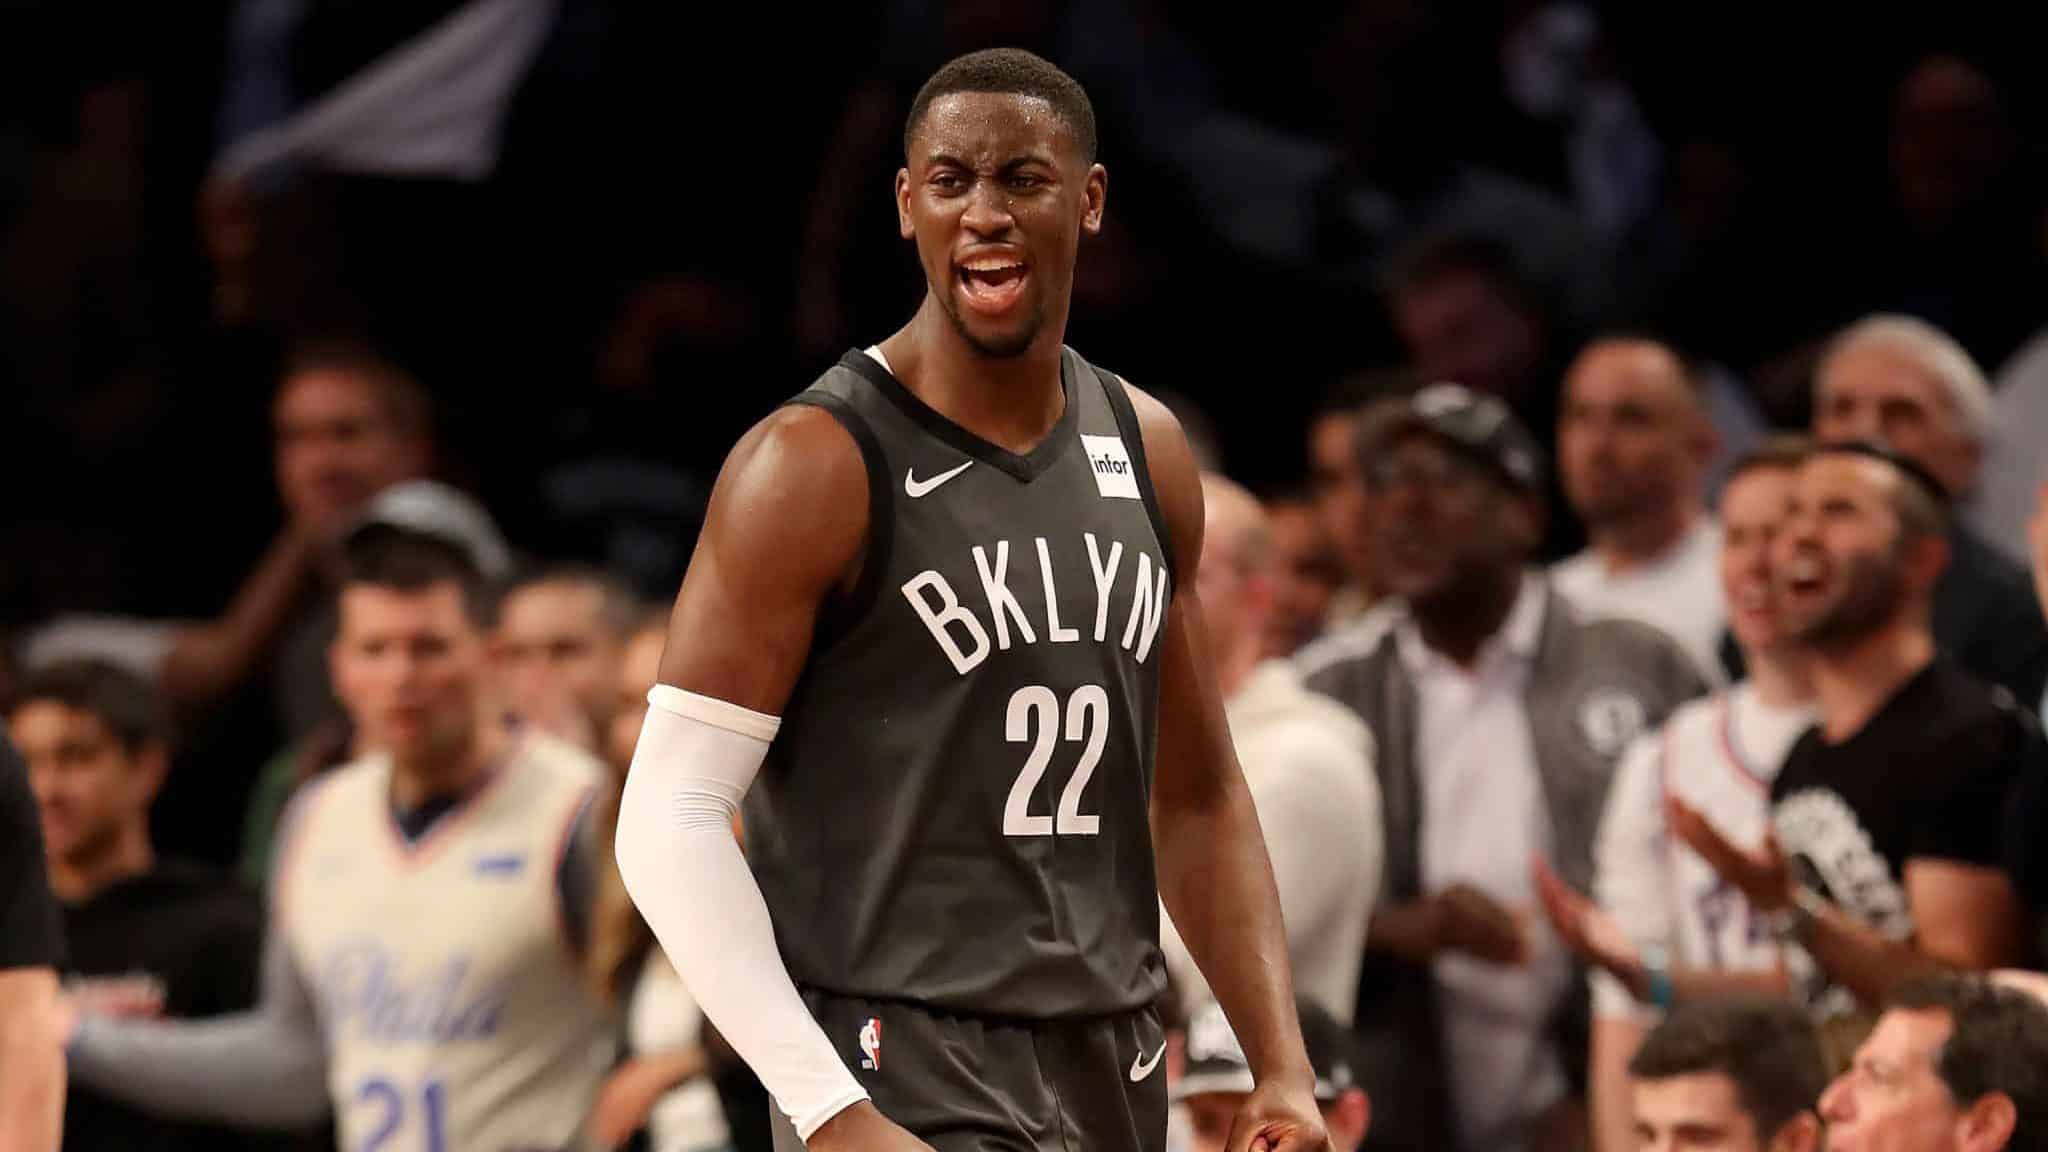 NEW YORK, NEW YORK - APRIL 20: Caris LeVert #22 of the Brooklyn Nets reacts in the first half against the Philadelphia 76ers at Barclays Center on April 20, 2019 in the Brooklyn borough of New York City. NOTE TO USER: User expressly acknowledges and agrees that, by downloading and or using this photograph, User is consenting to the terms and conditions of the Getty Images License Agreement.